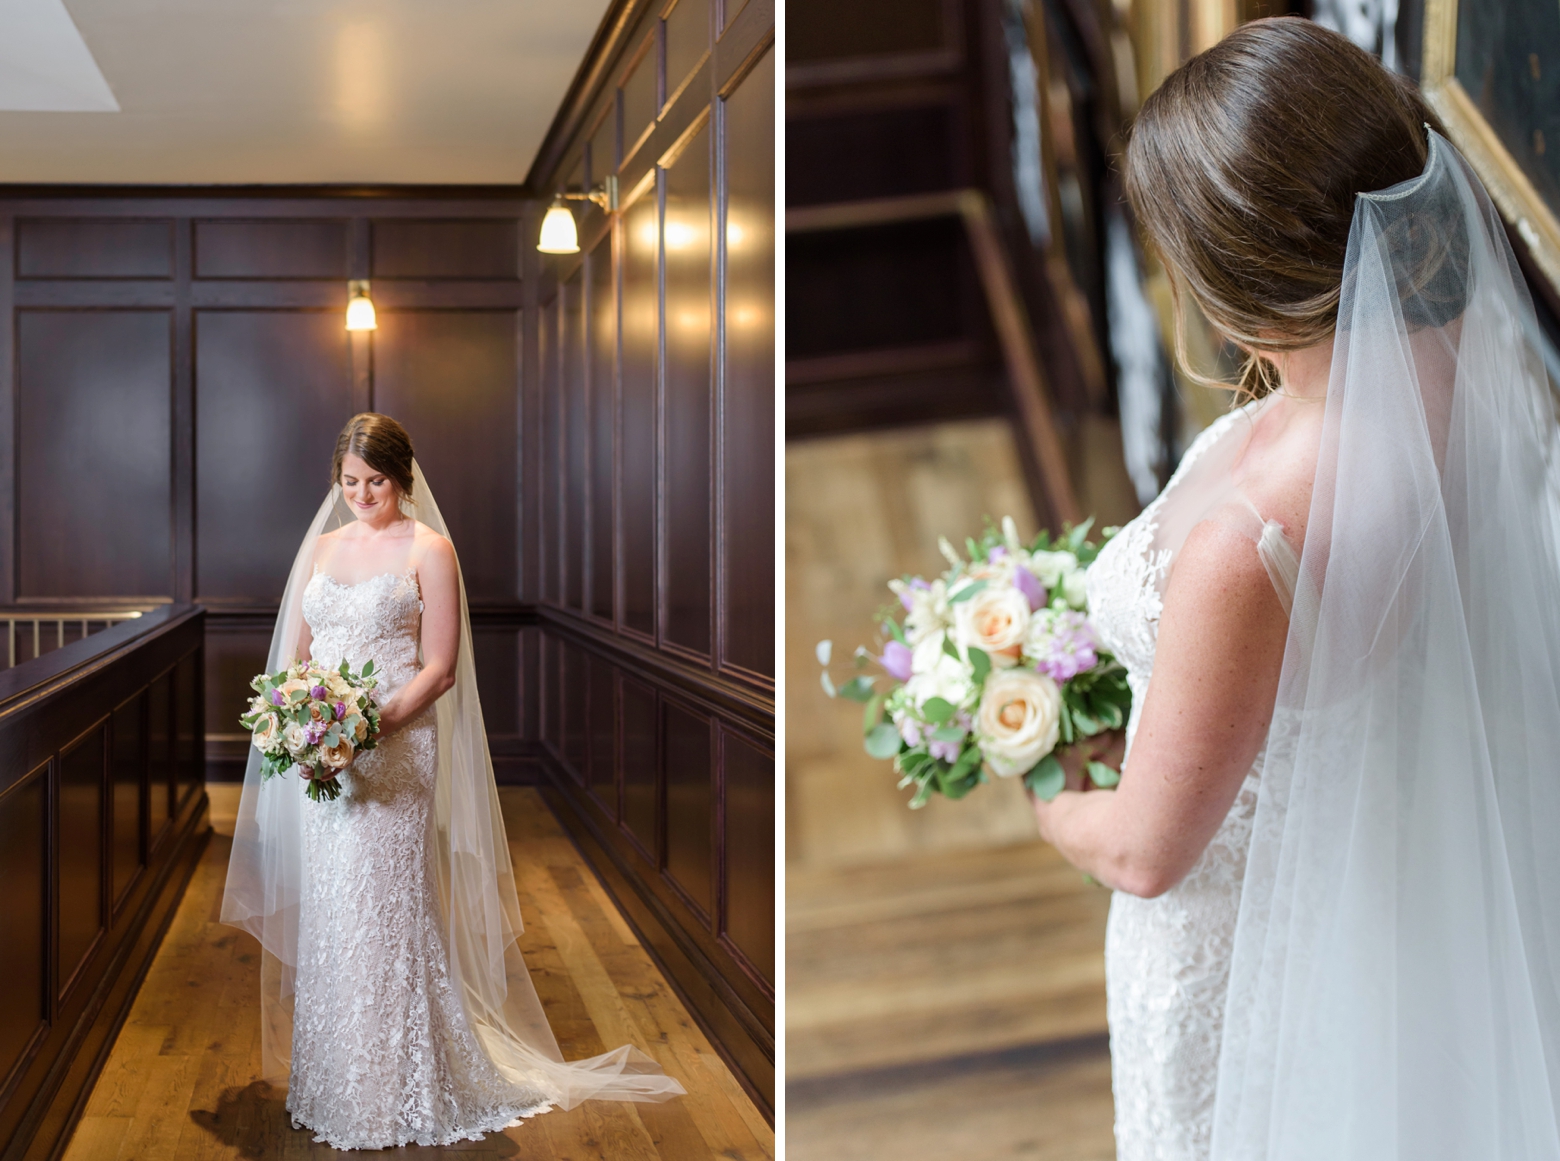 A classic portrait of a bride and a detail shot of her veil while she holds pastel florals